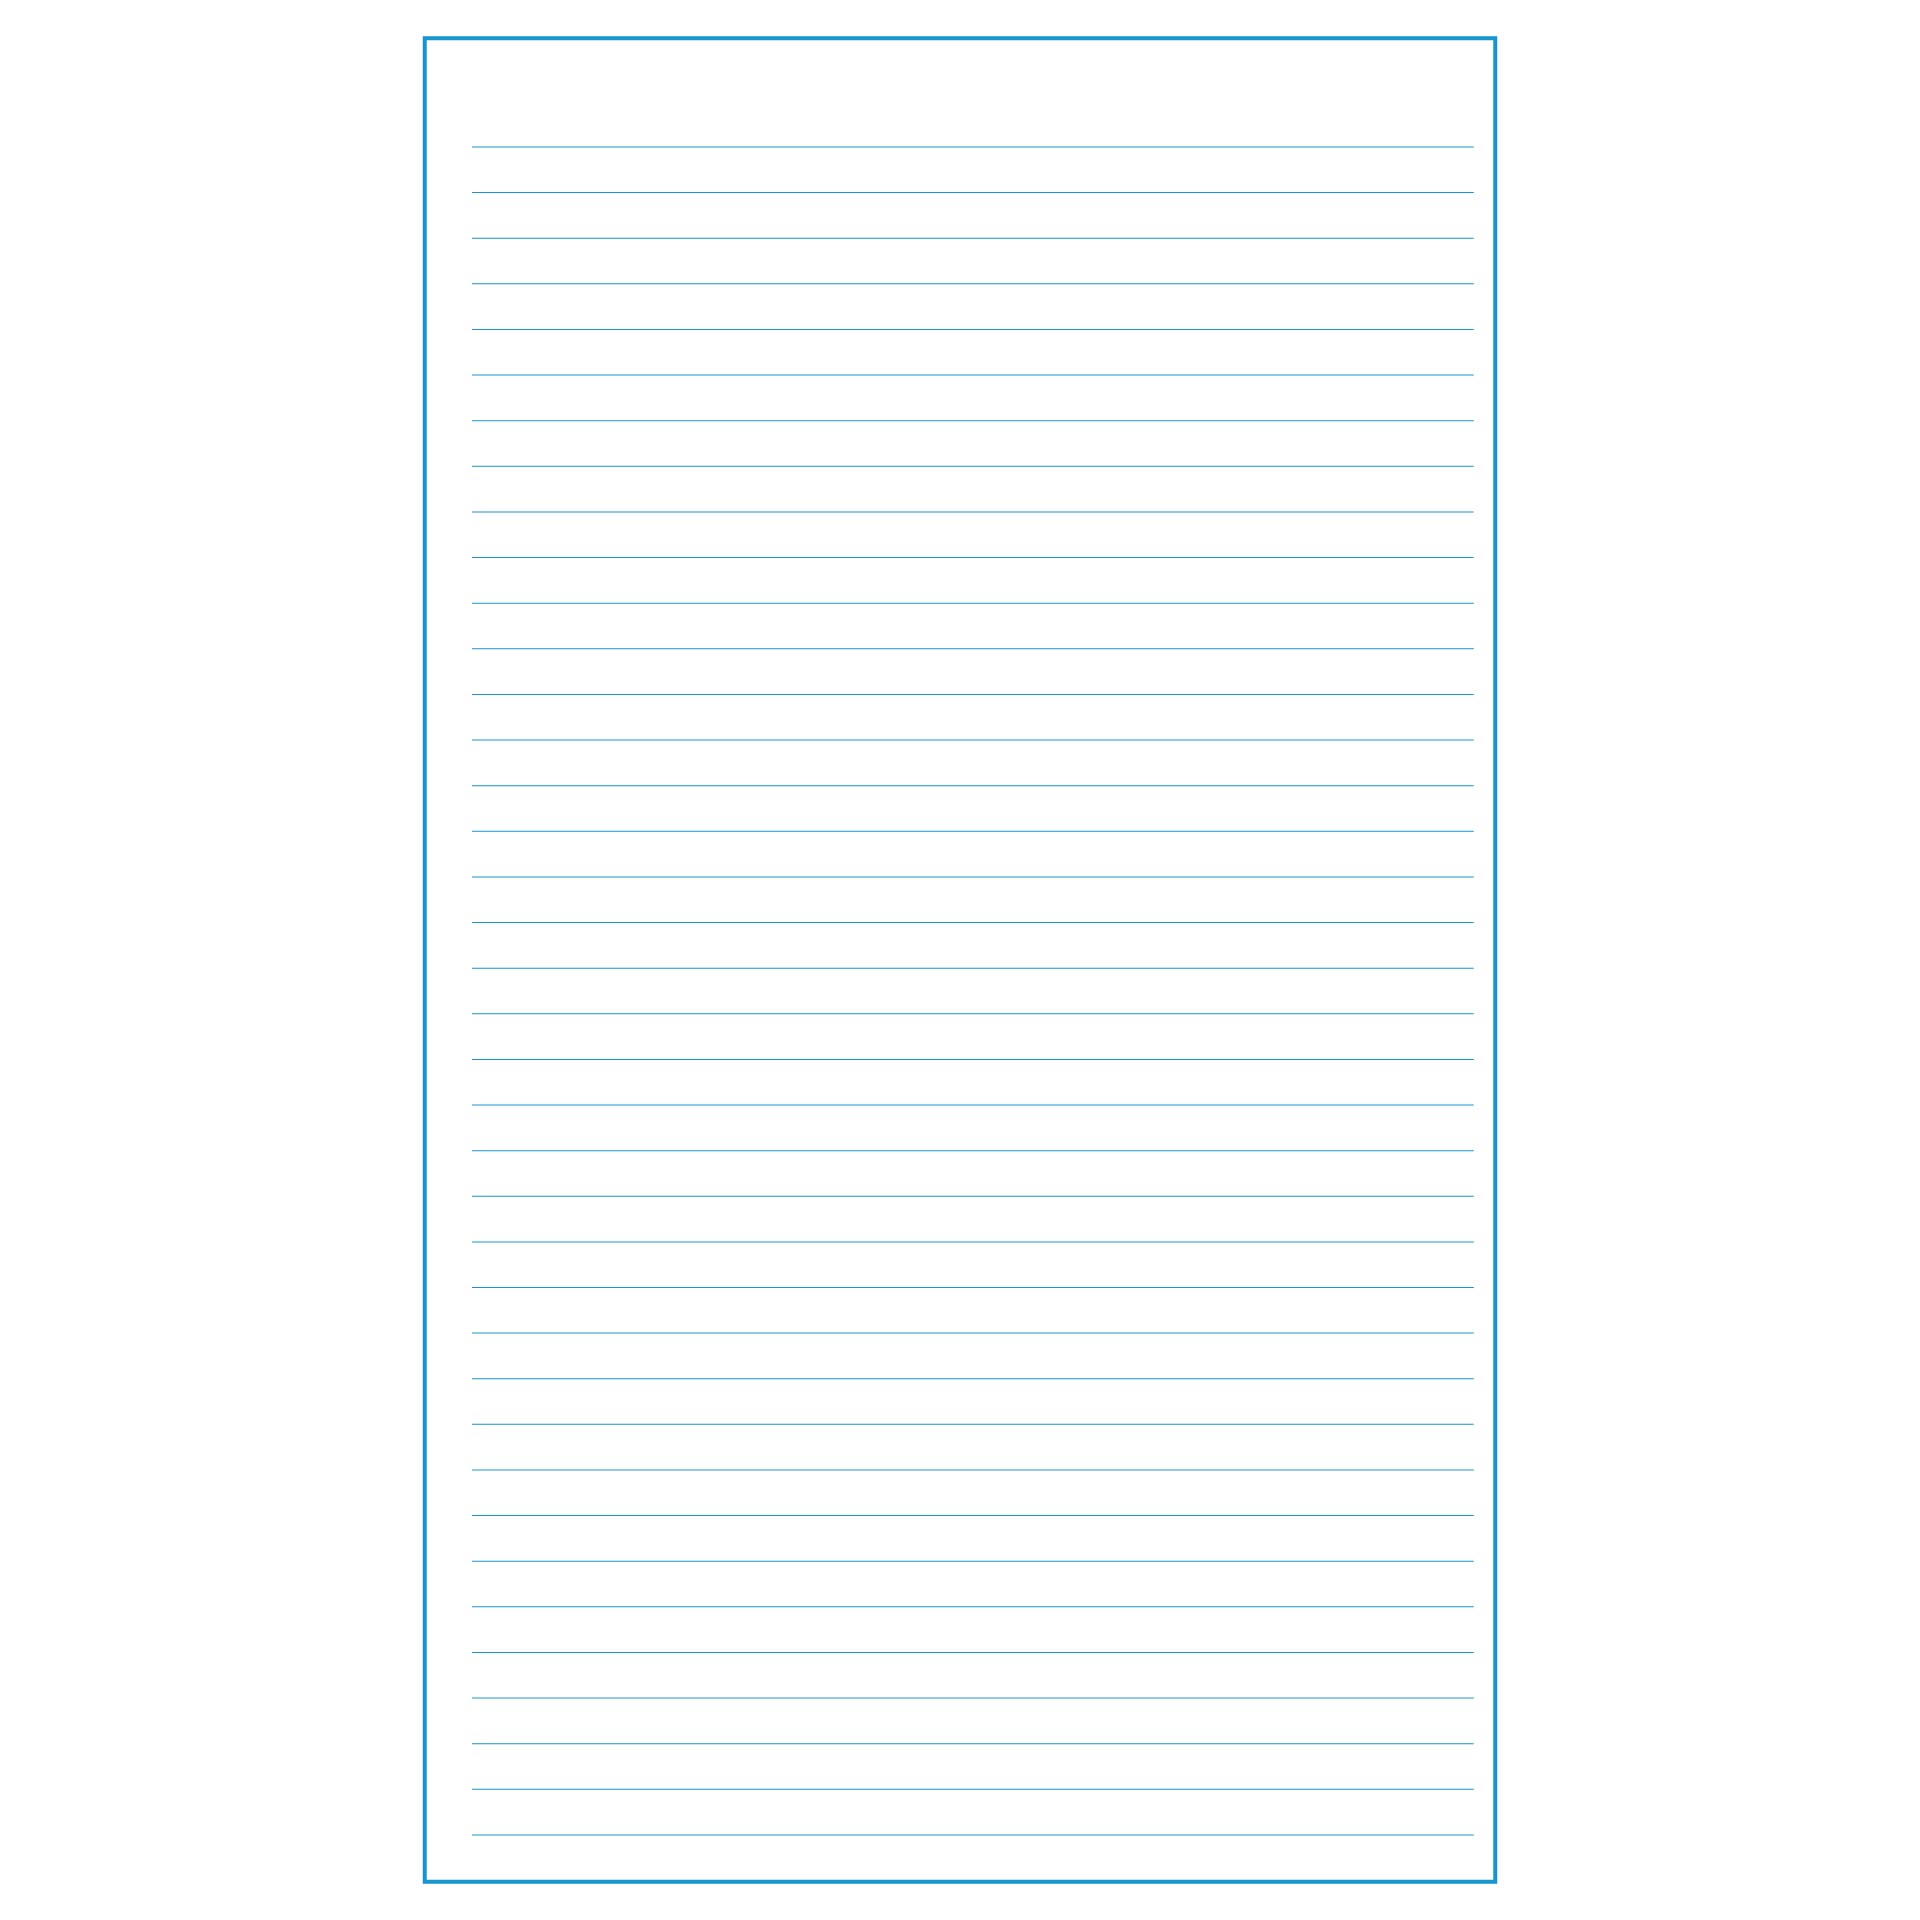 5 Best Images of Printable Blank Writing Pages Free Printable